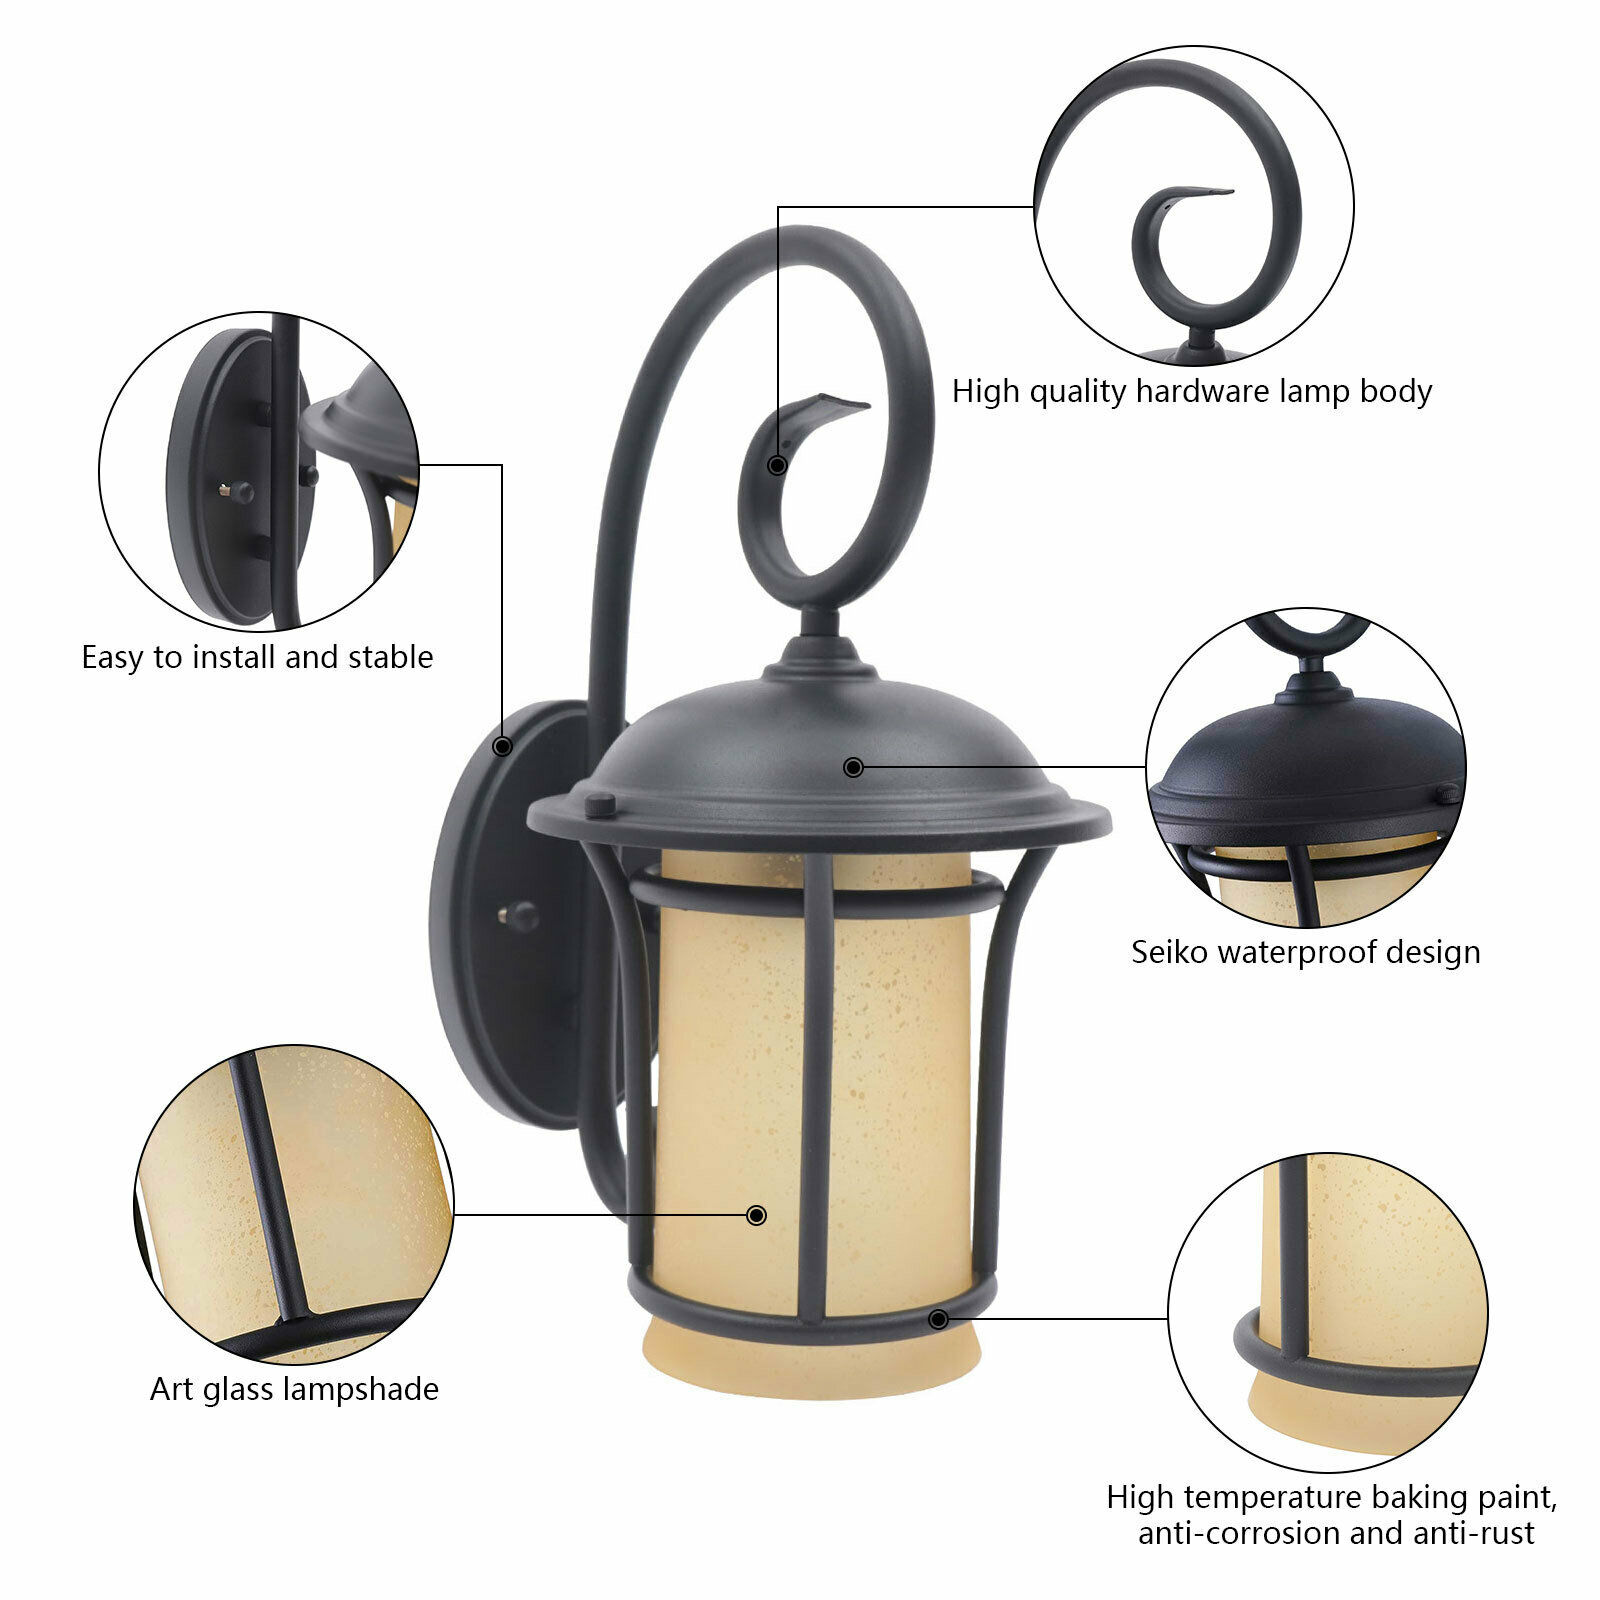 Exterior Wall Light Fixture Sconce Vintage Outdoor Retro Ground Glass Porch Lamp Outdoor Wall Light Exterior Wall Lantern Waterproof Sconce Porch Black Finshing Entryways Lighting Wall Mounted Lamp - image 4 of 10